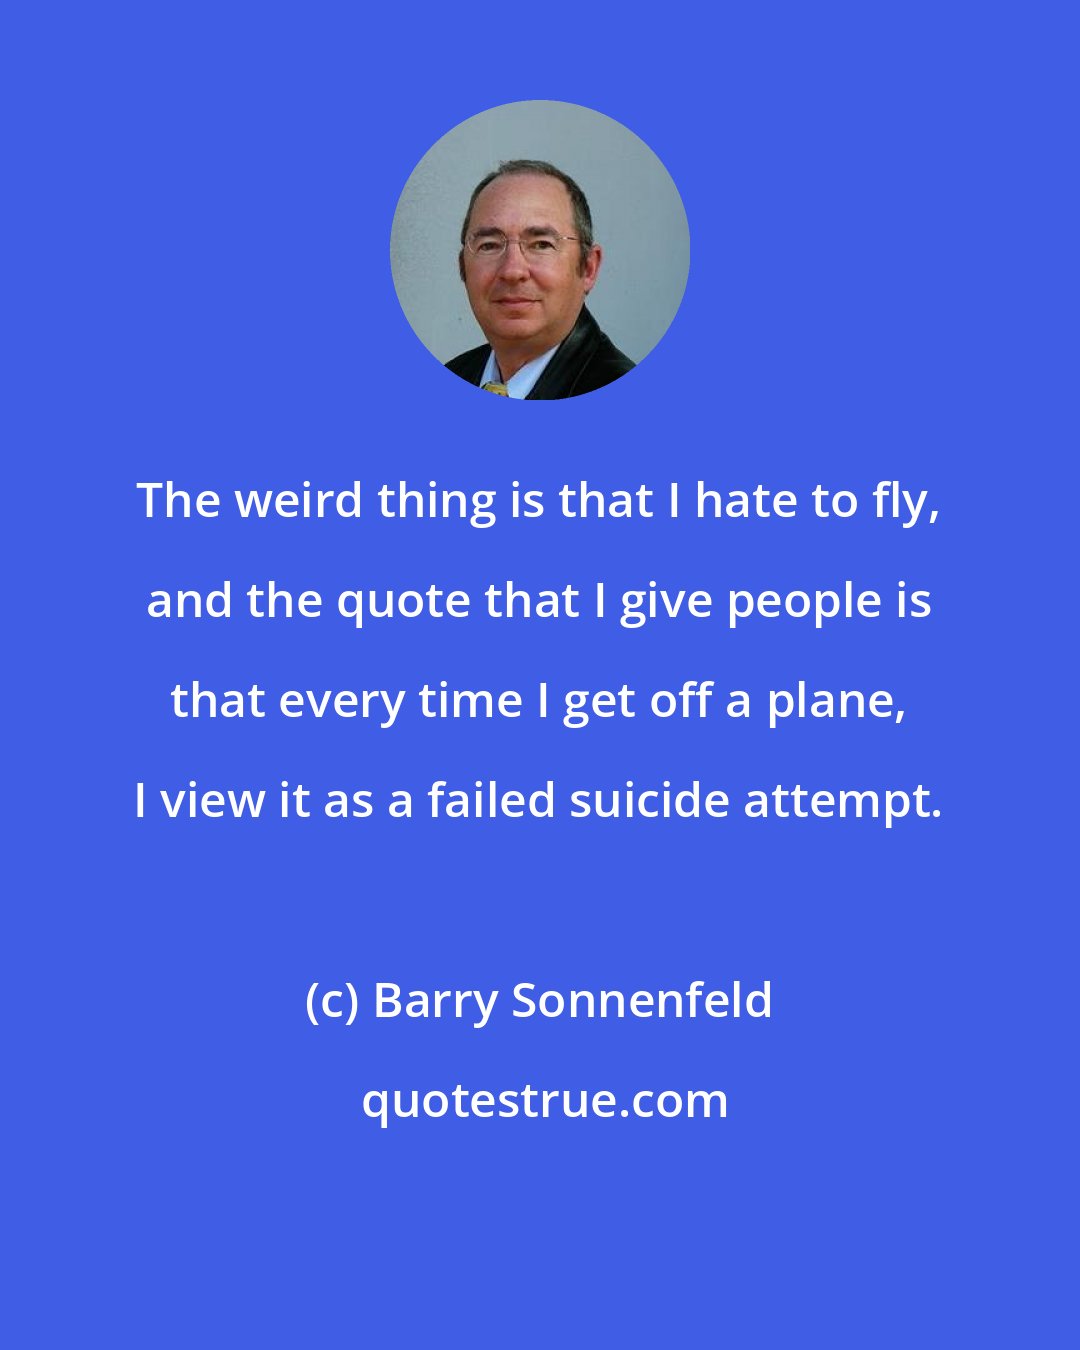 Barry Sonnenfeld: The weird thing is that I hate to fly, and the quote that I give people is that every time I get off a plane, I view it as a failed suicide attempt.